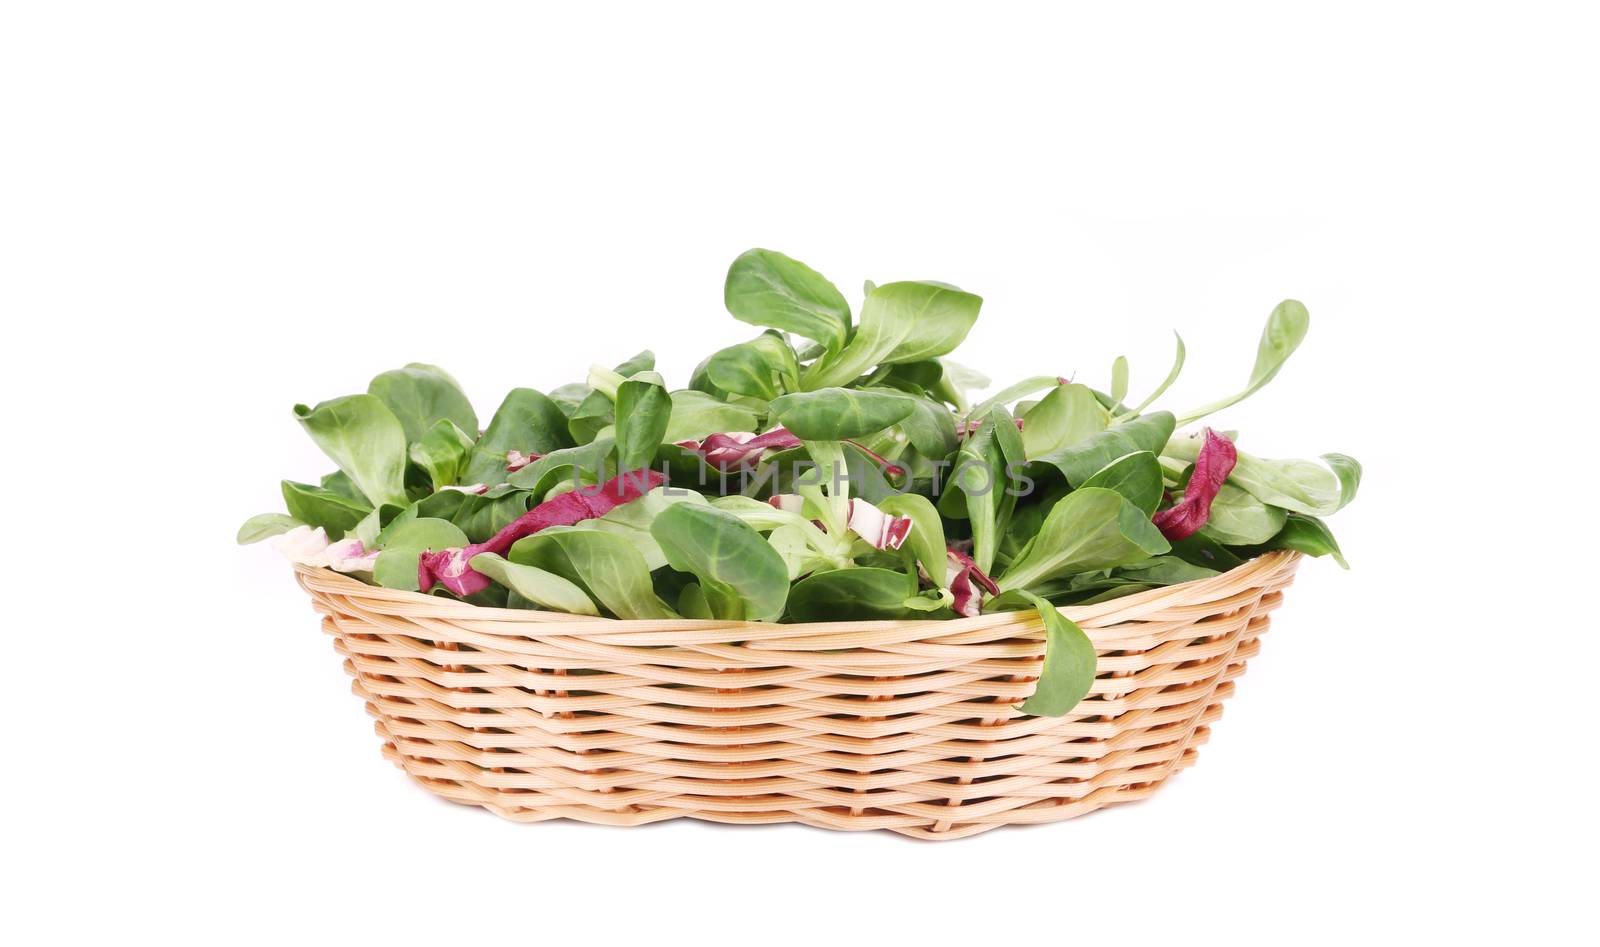 Spinach and radicchio rosso mix on wicker basket. Isolated on a white background.